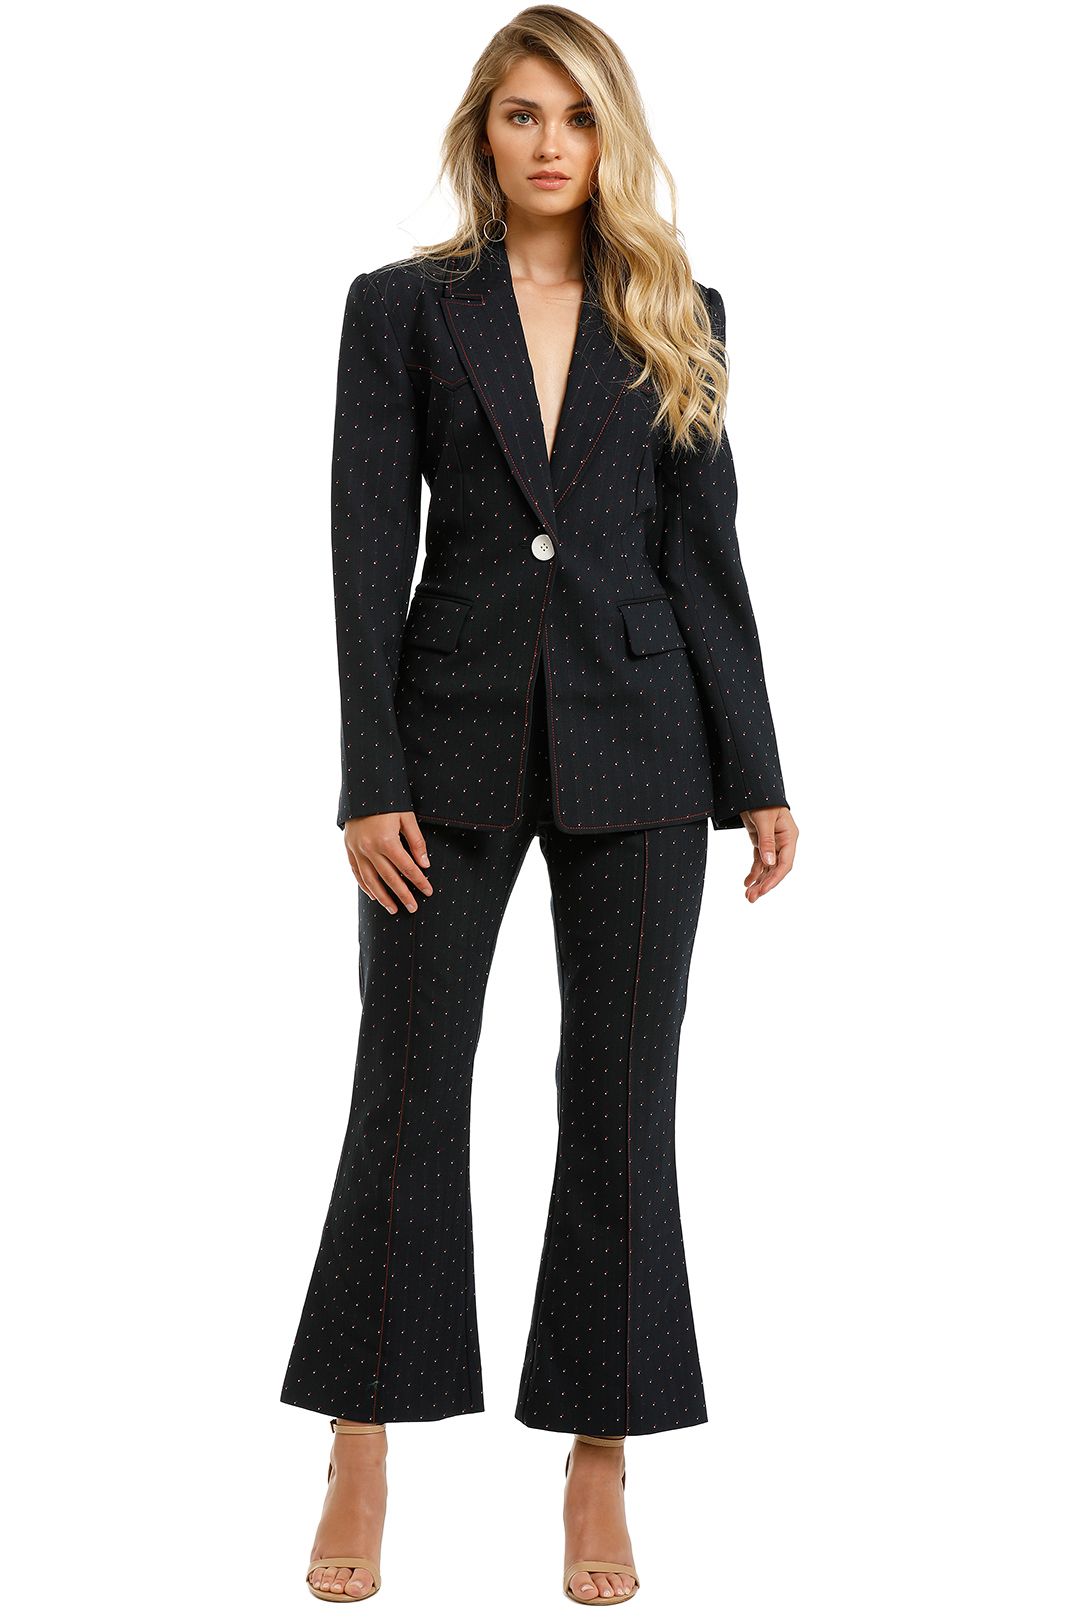 Lover-Jagger-Tailored-Jacket-and-Pant-Set-Navy-Front